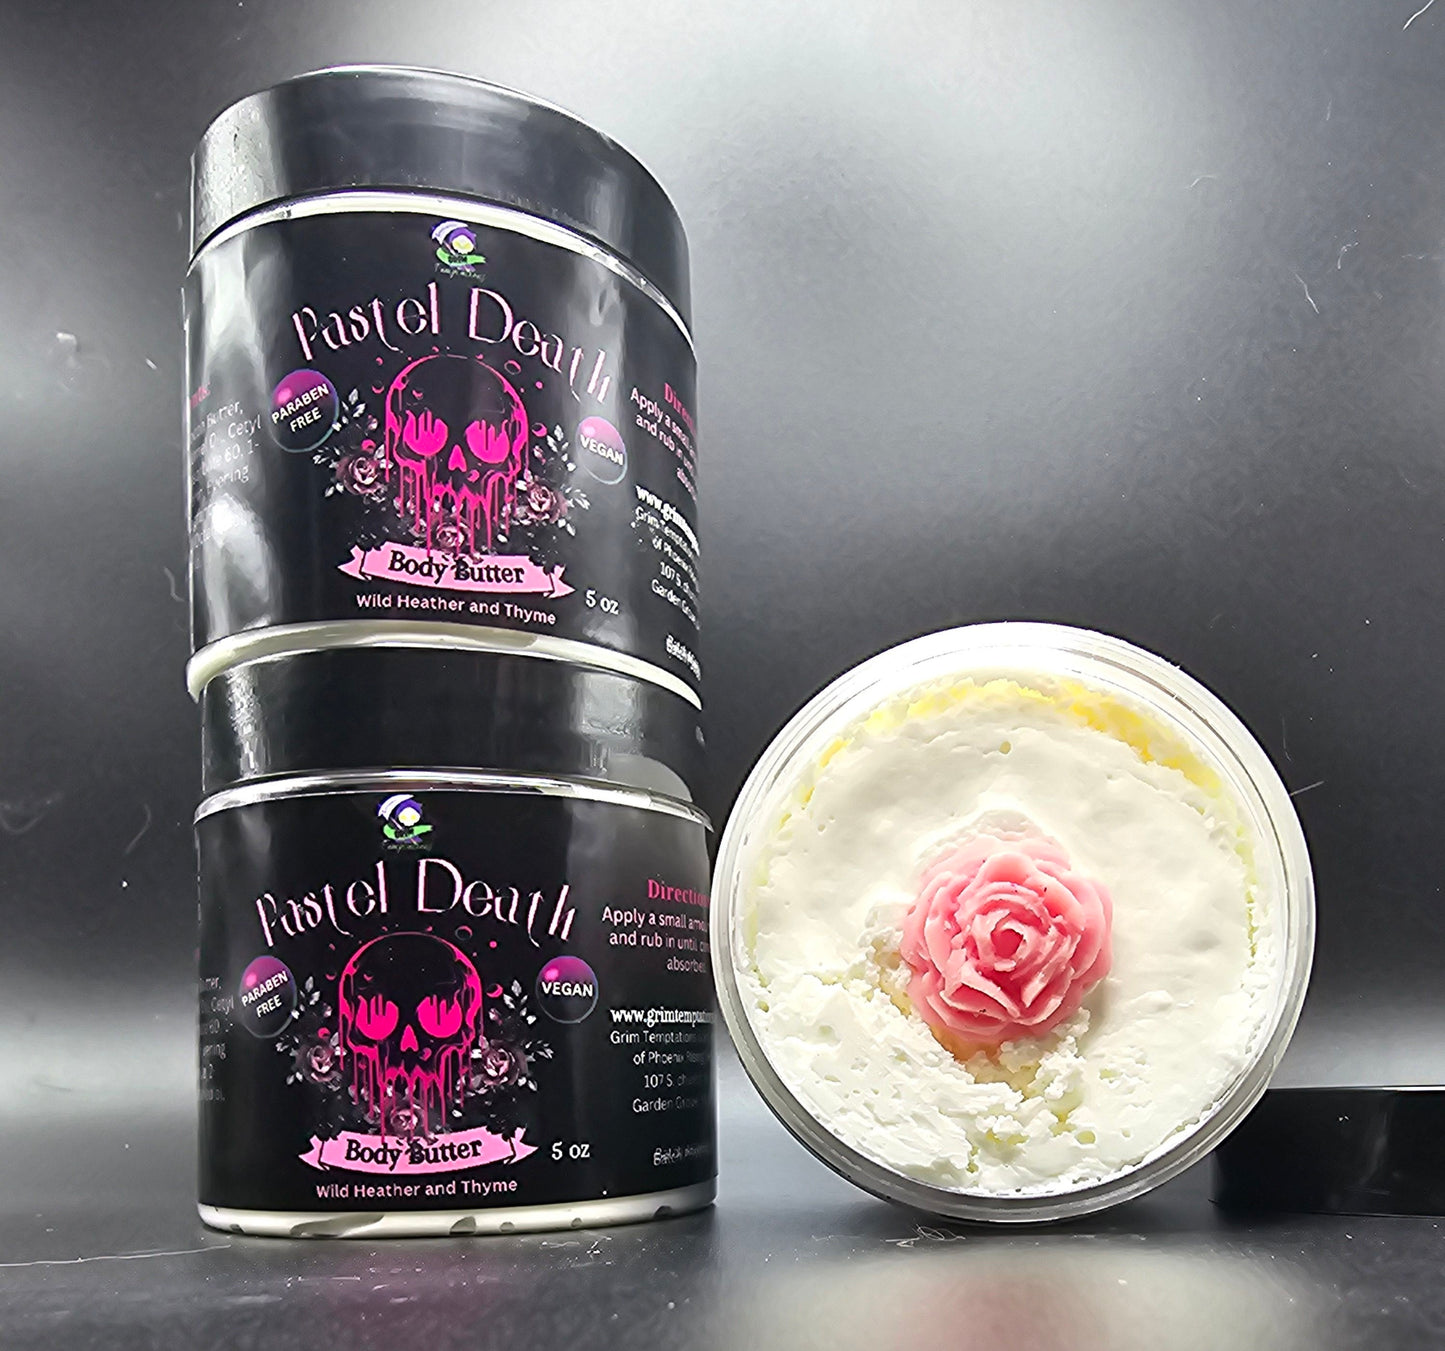 Pastel Goth Pink and Black Moisturizing Body Butter | Wild Heather and Thyme Scent | Gift for girlfriends, wife, sister, daughter, mom